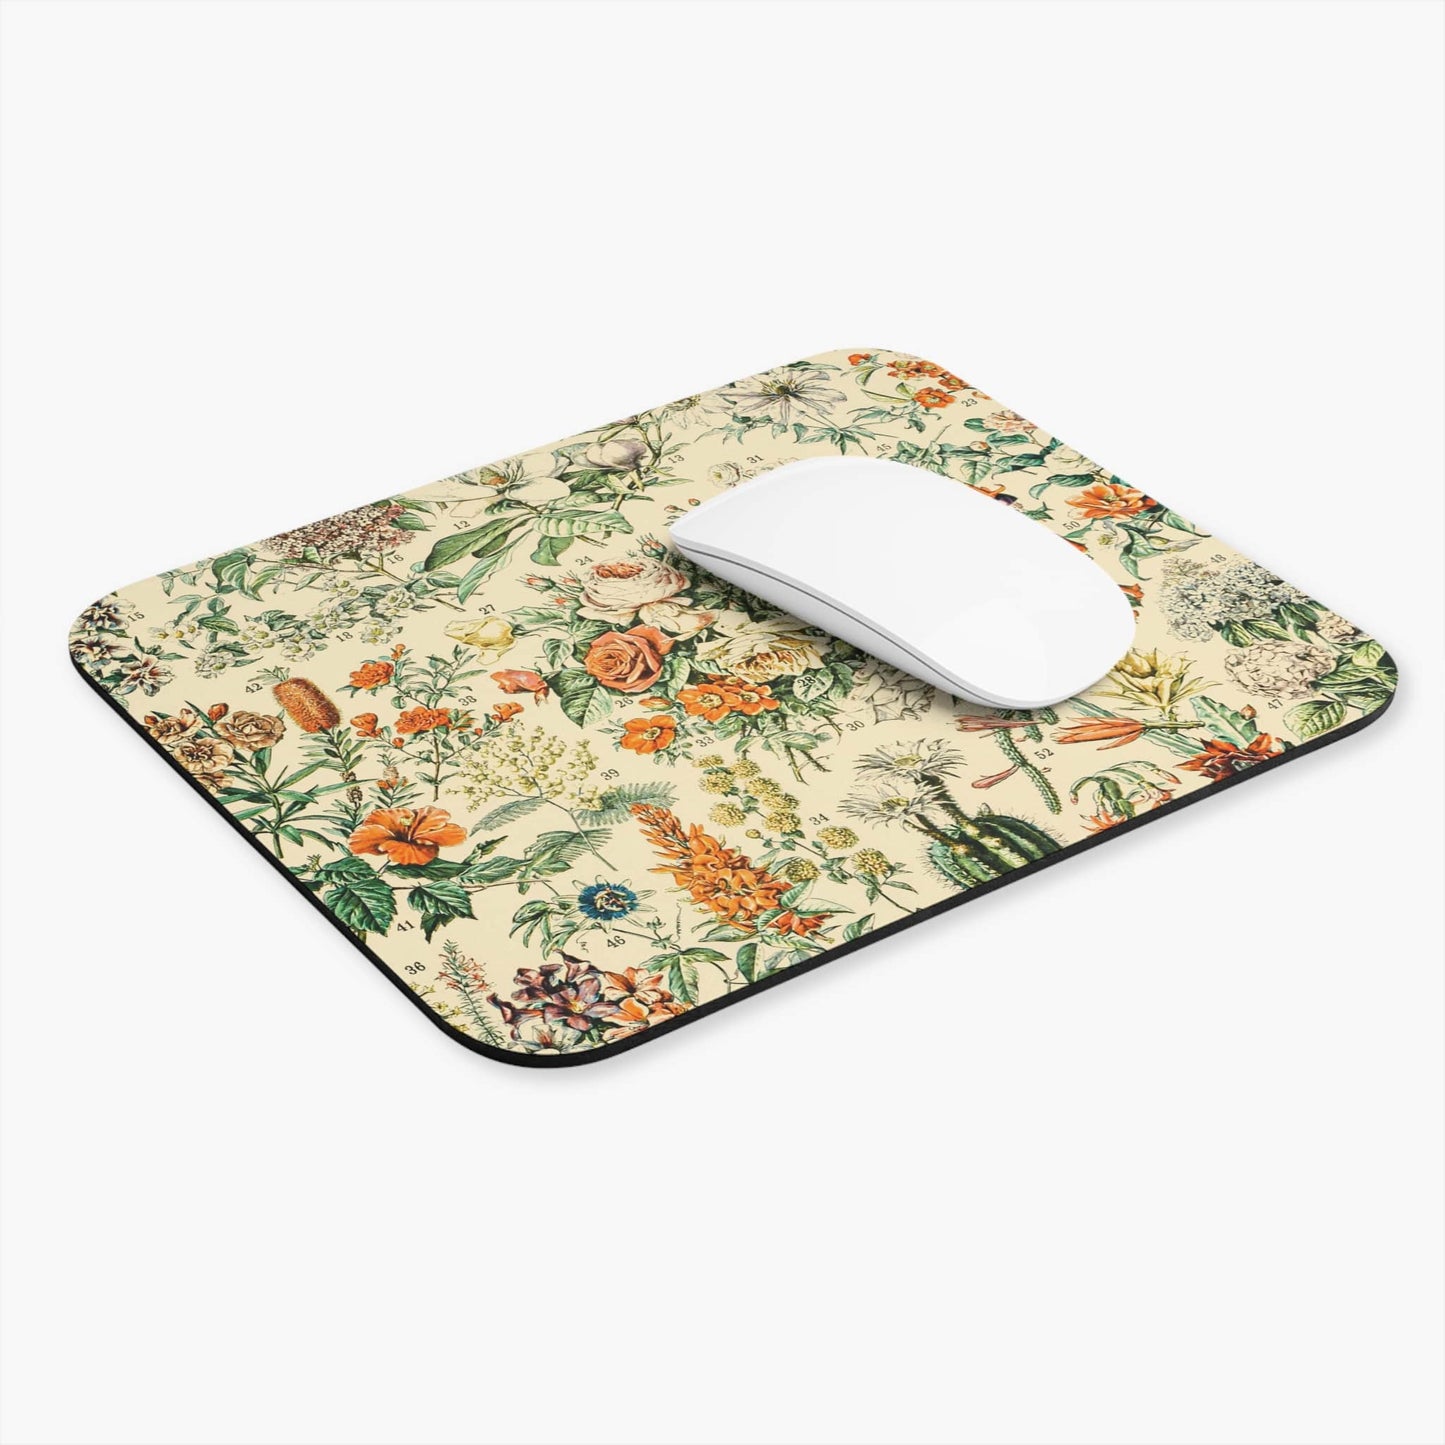 Flowers and Plants Computer Desk Mouse Pad With White Mouse